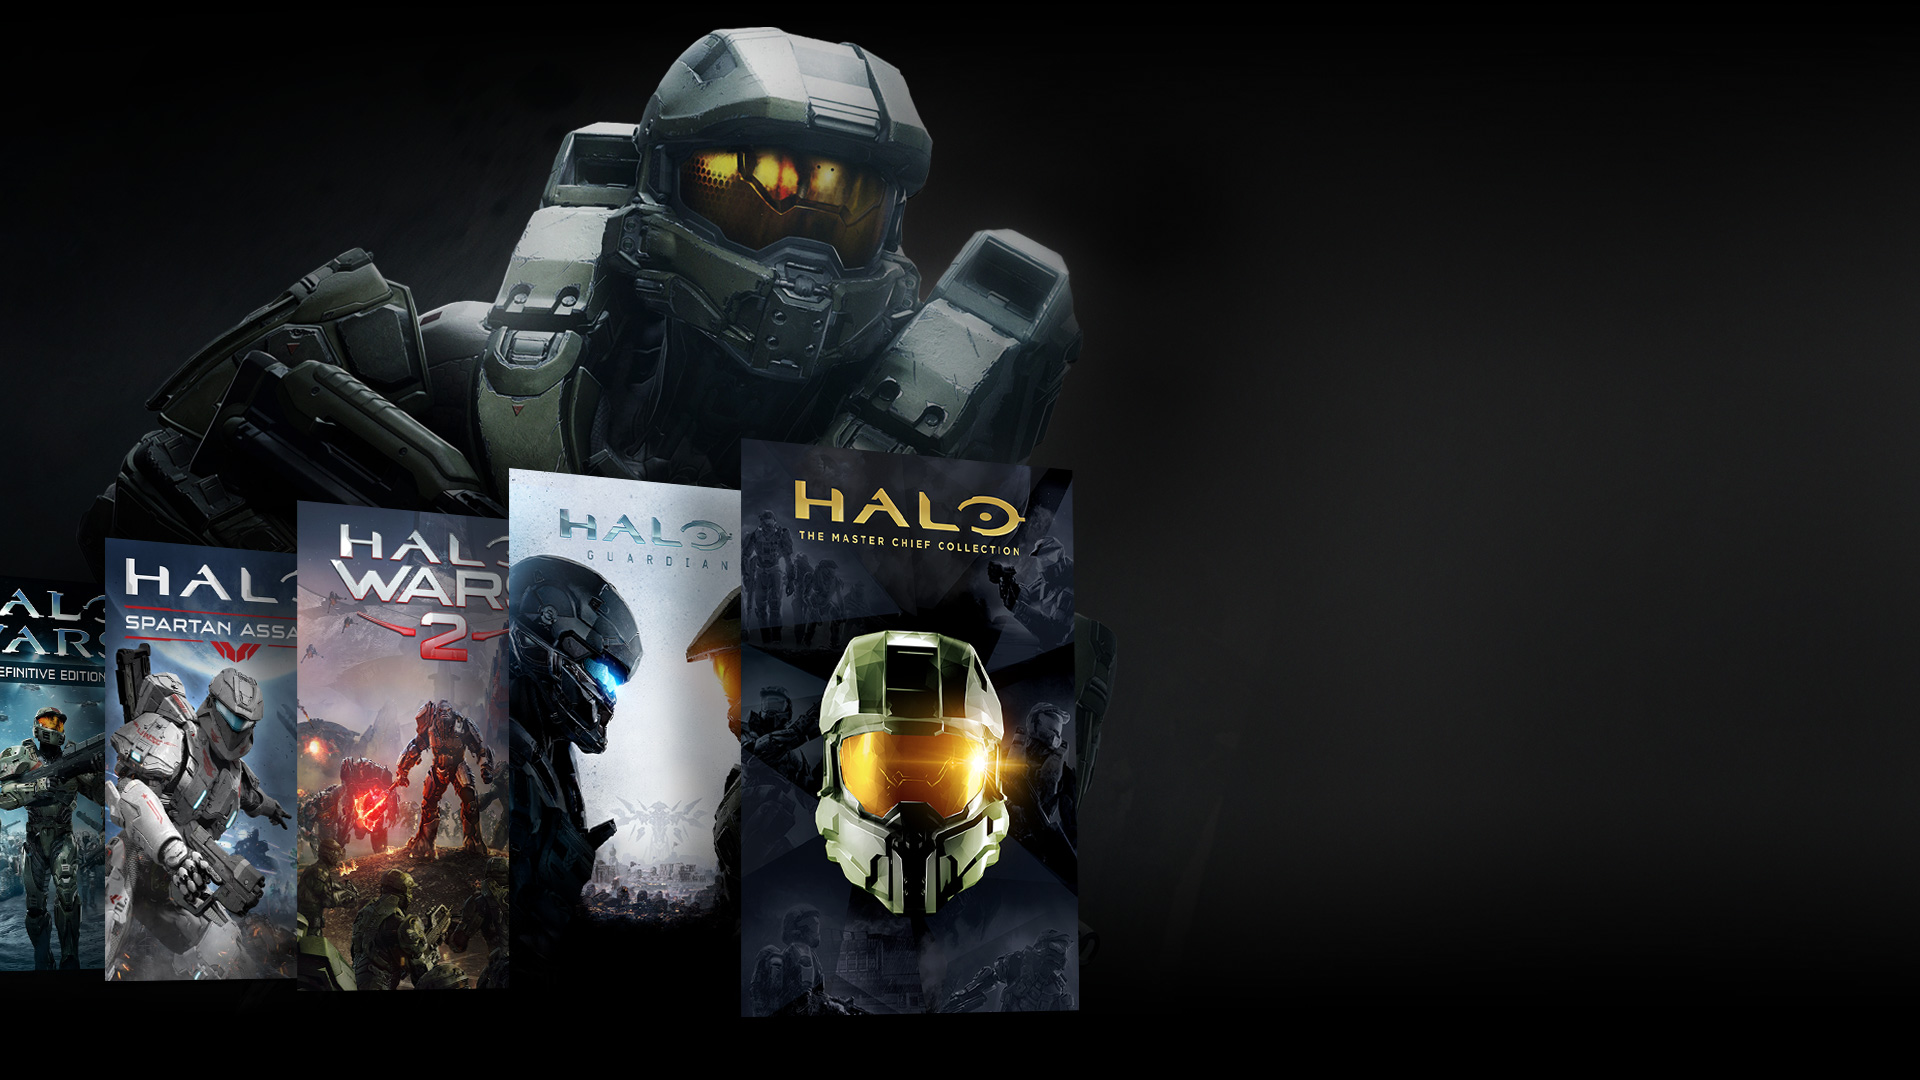 newest halo games